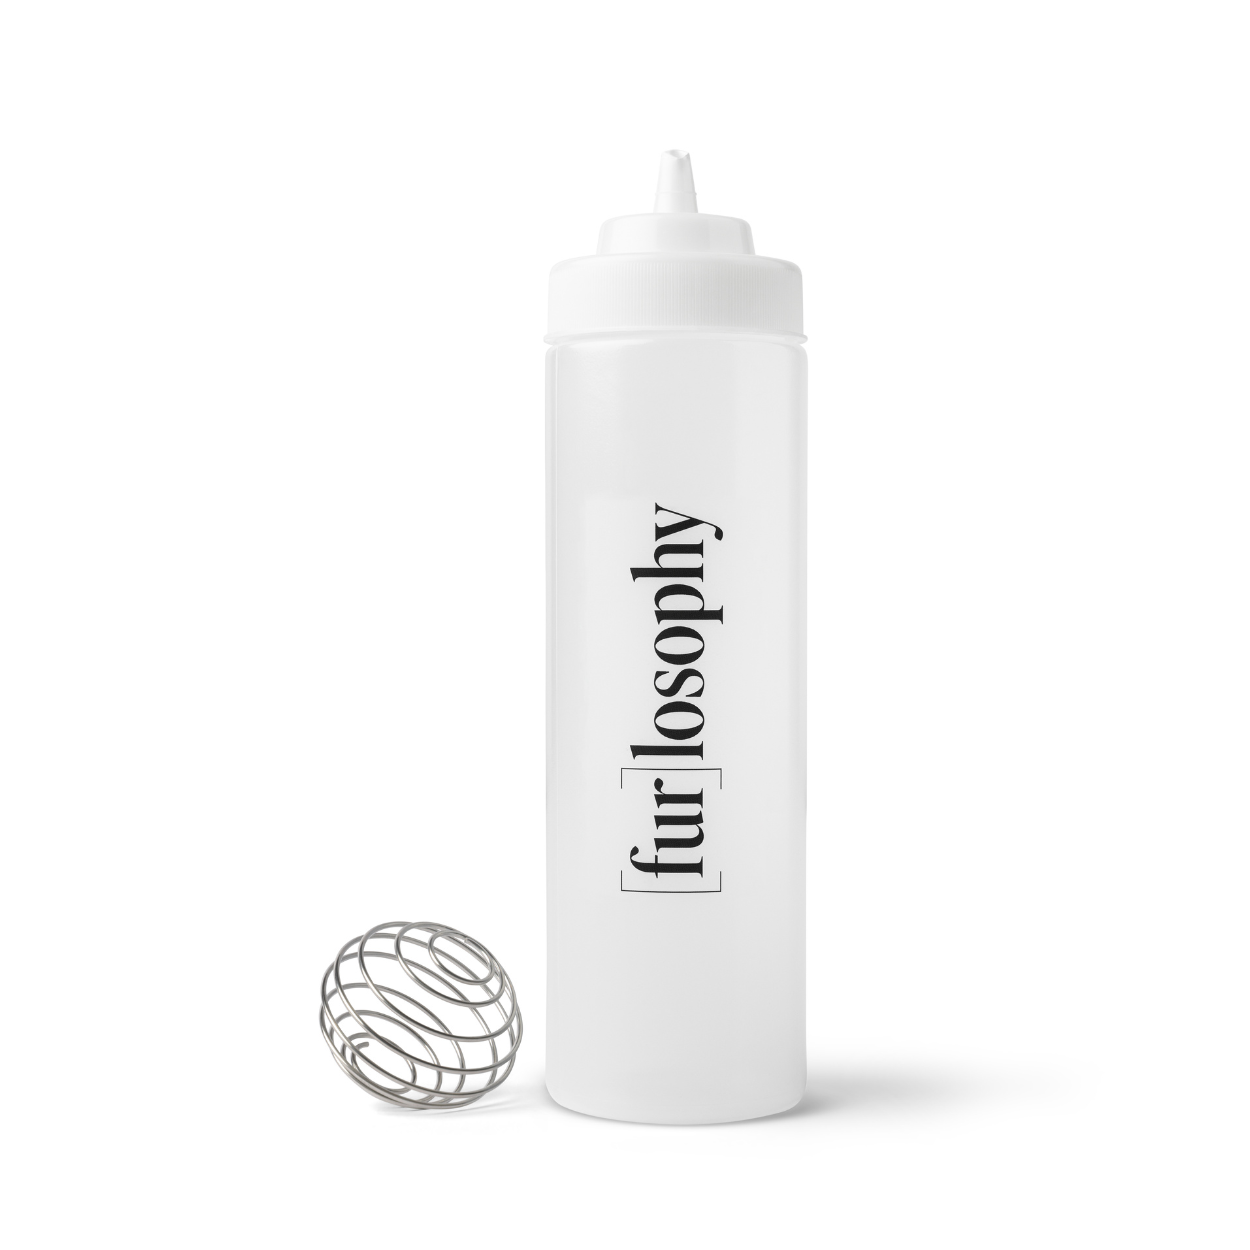 Replacement Dilution Bottle & Shaker Ball – [fur]losophy